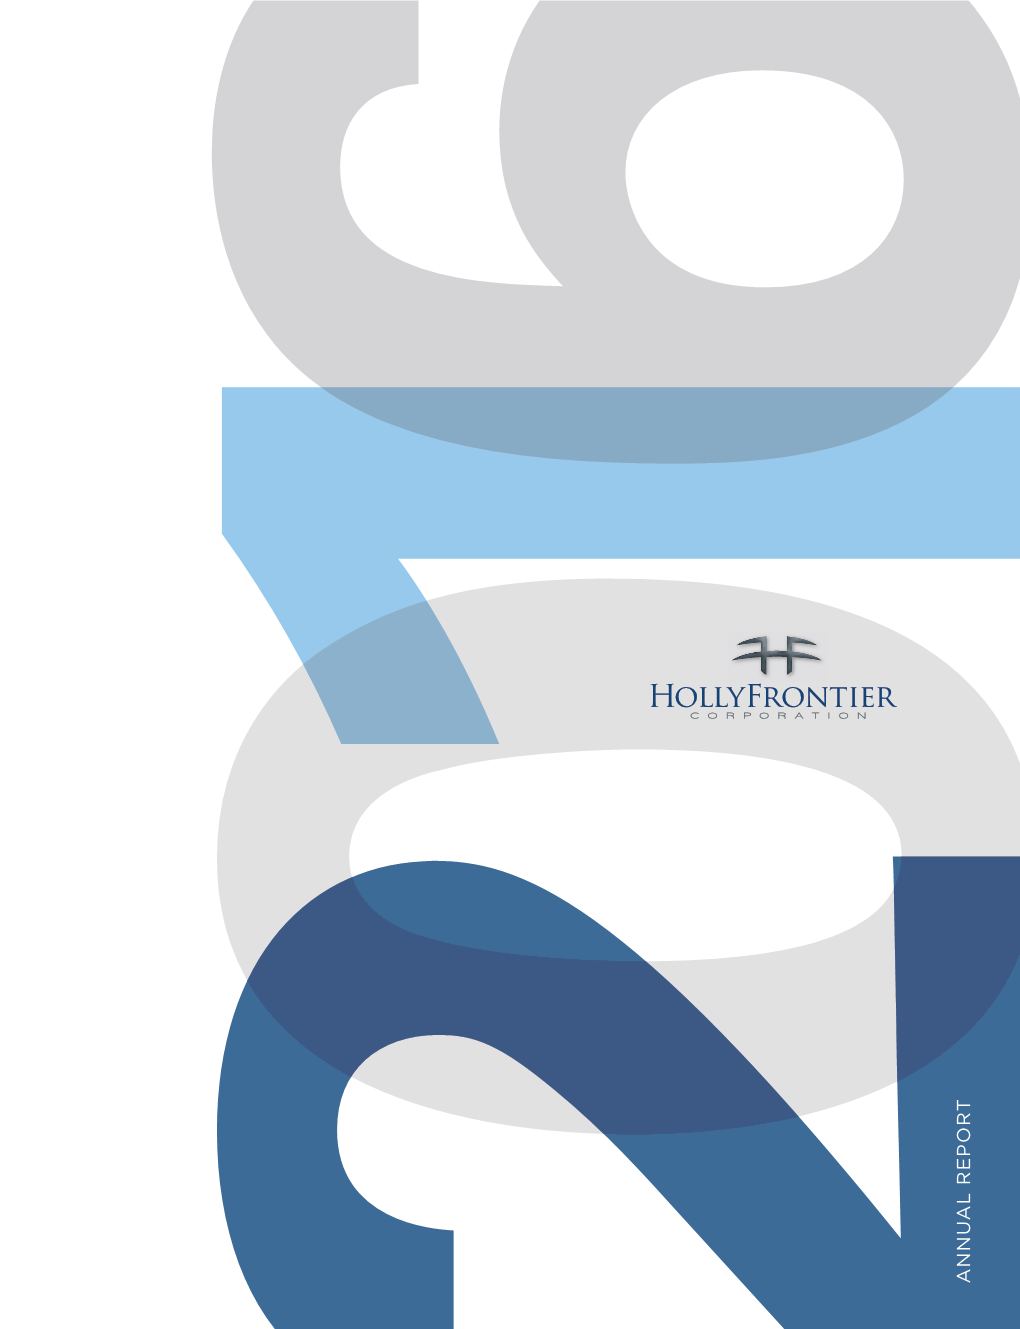 Hollyfrontier Corporation 2016 Annual Report